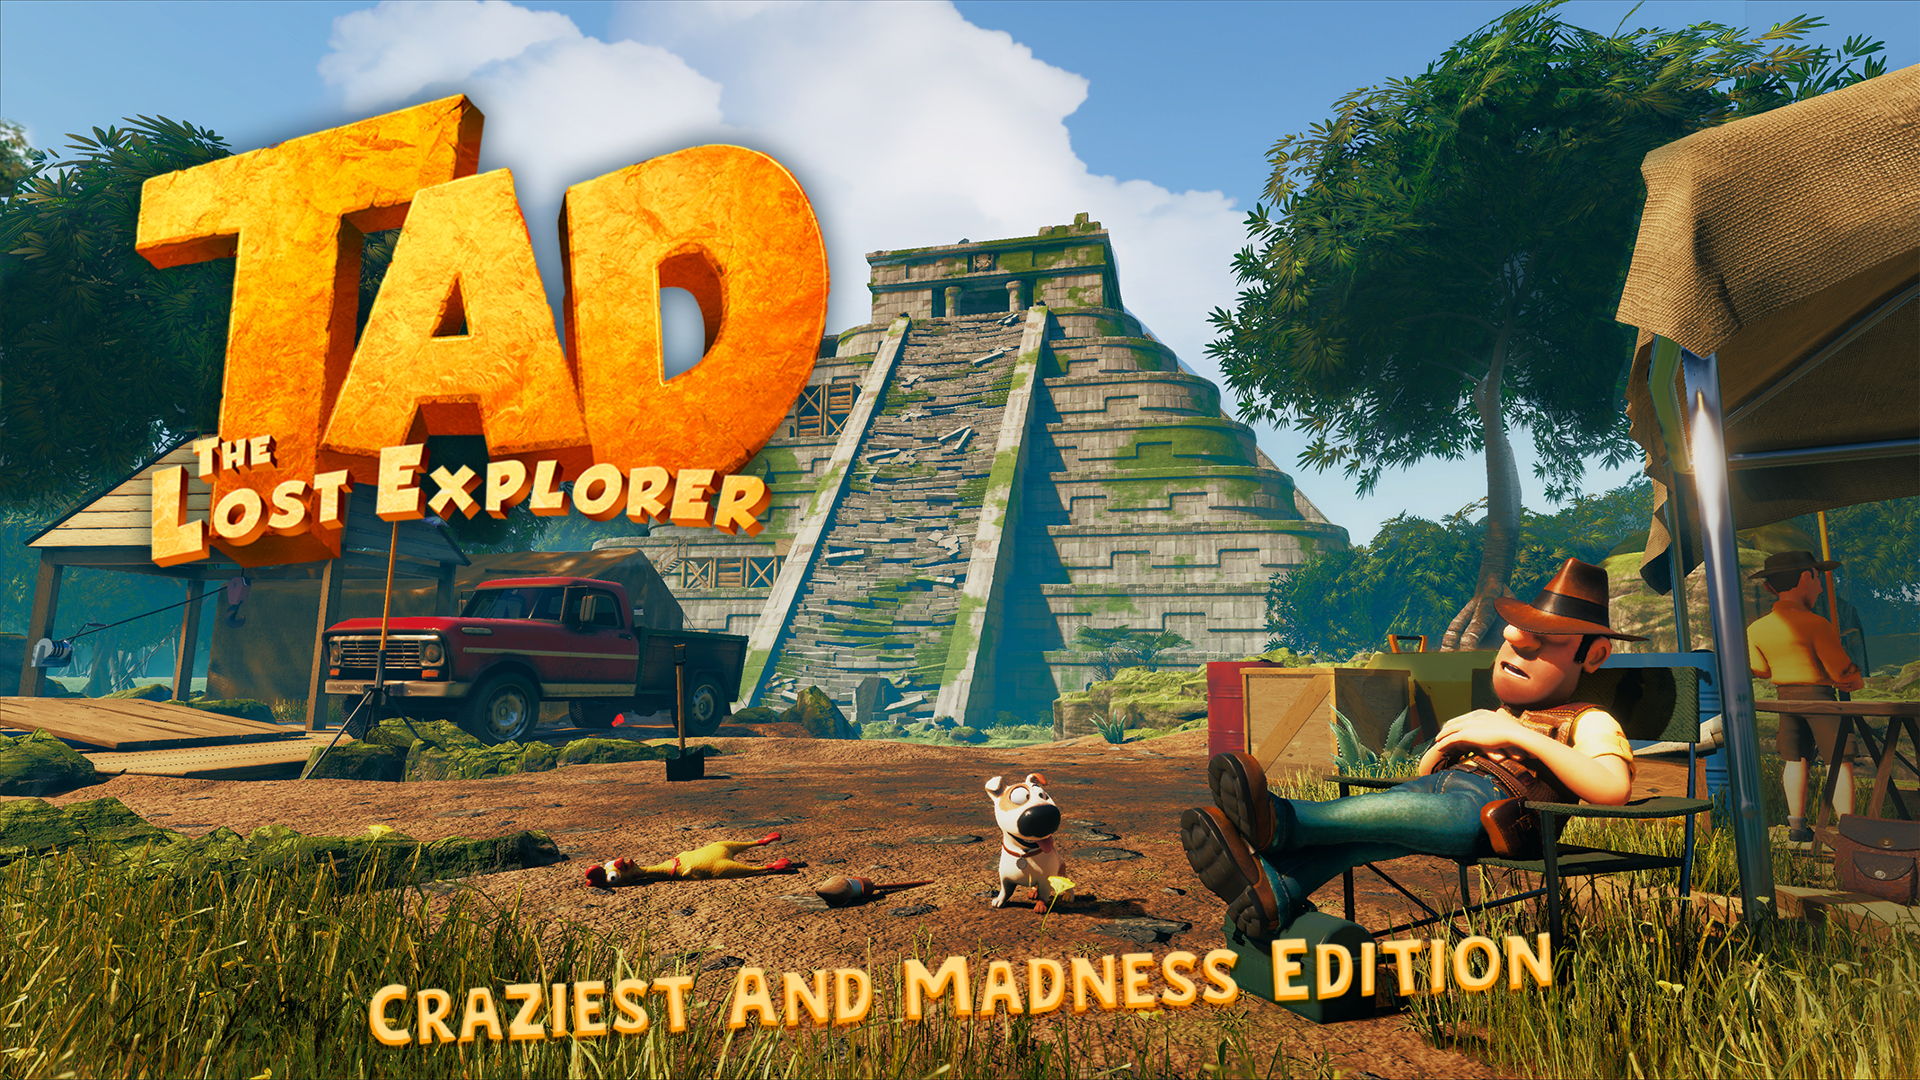 TAD JONES – The Lost Explorer – Craziest and Madness Edition